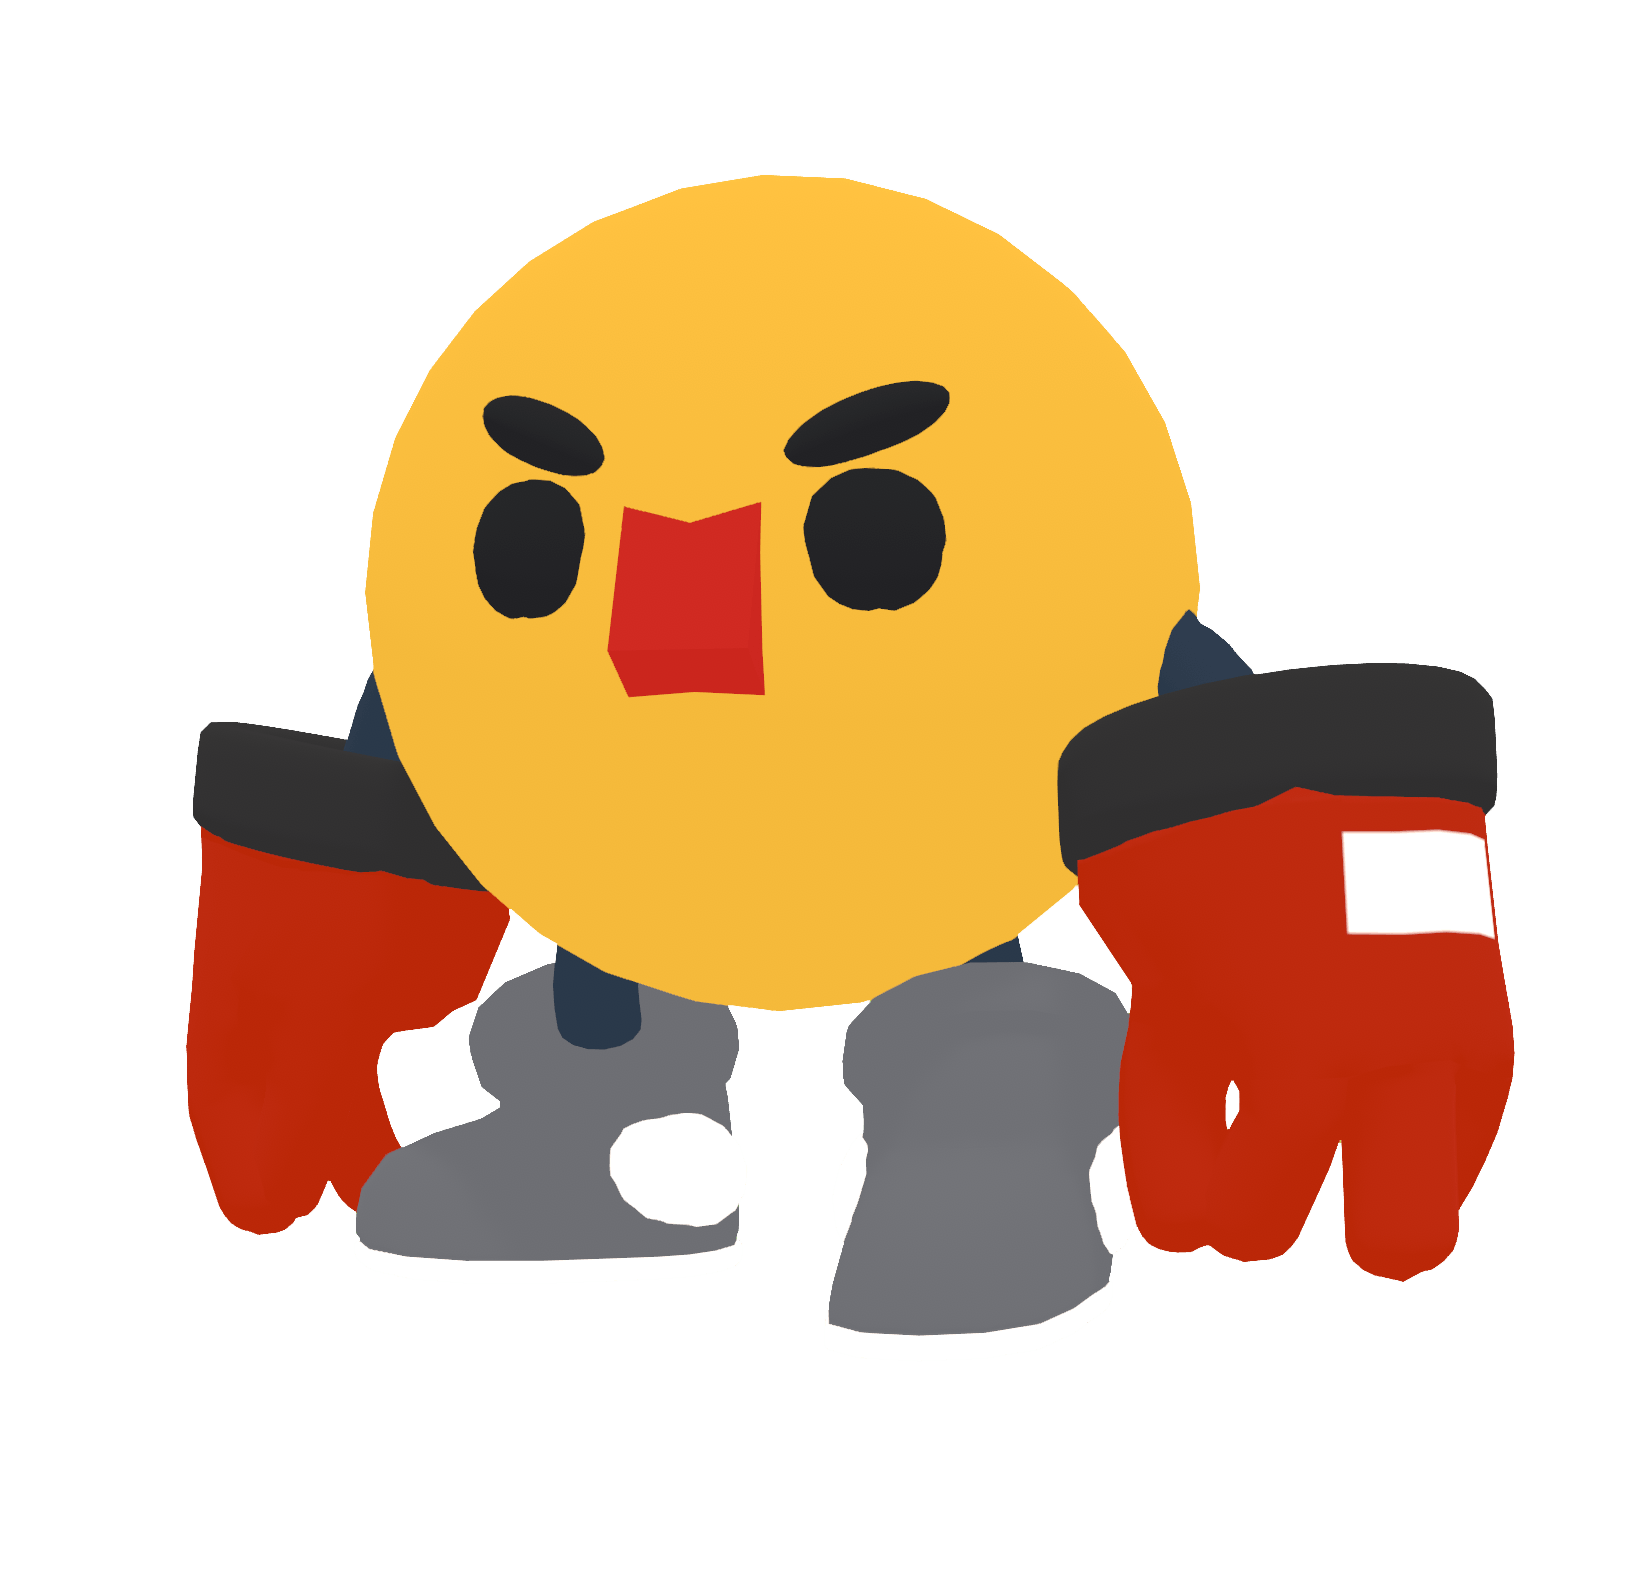 A ball shaped character with a big red nose, big red gloves and grey sneakers.